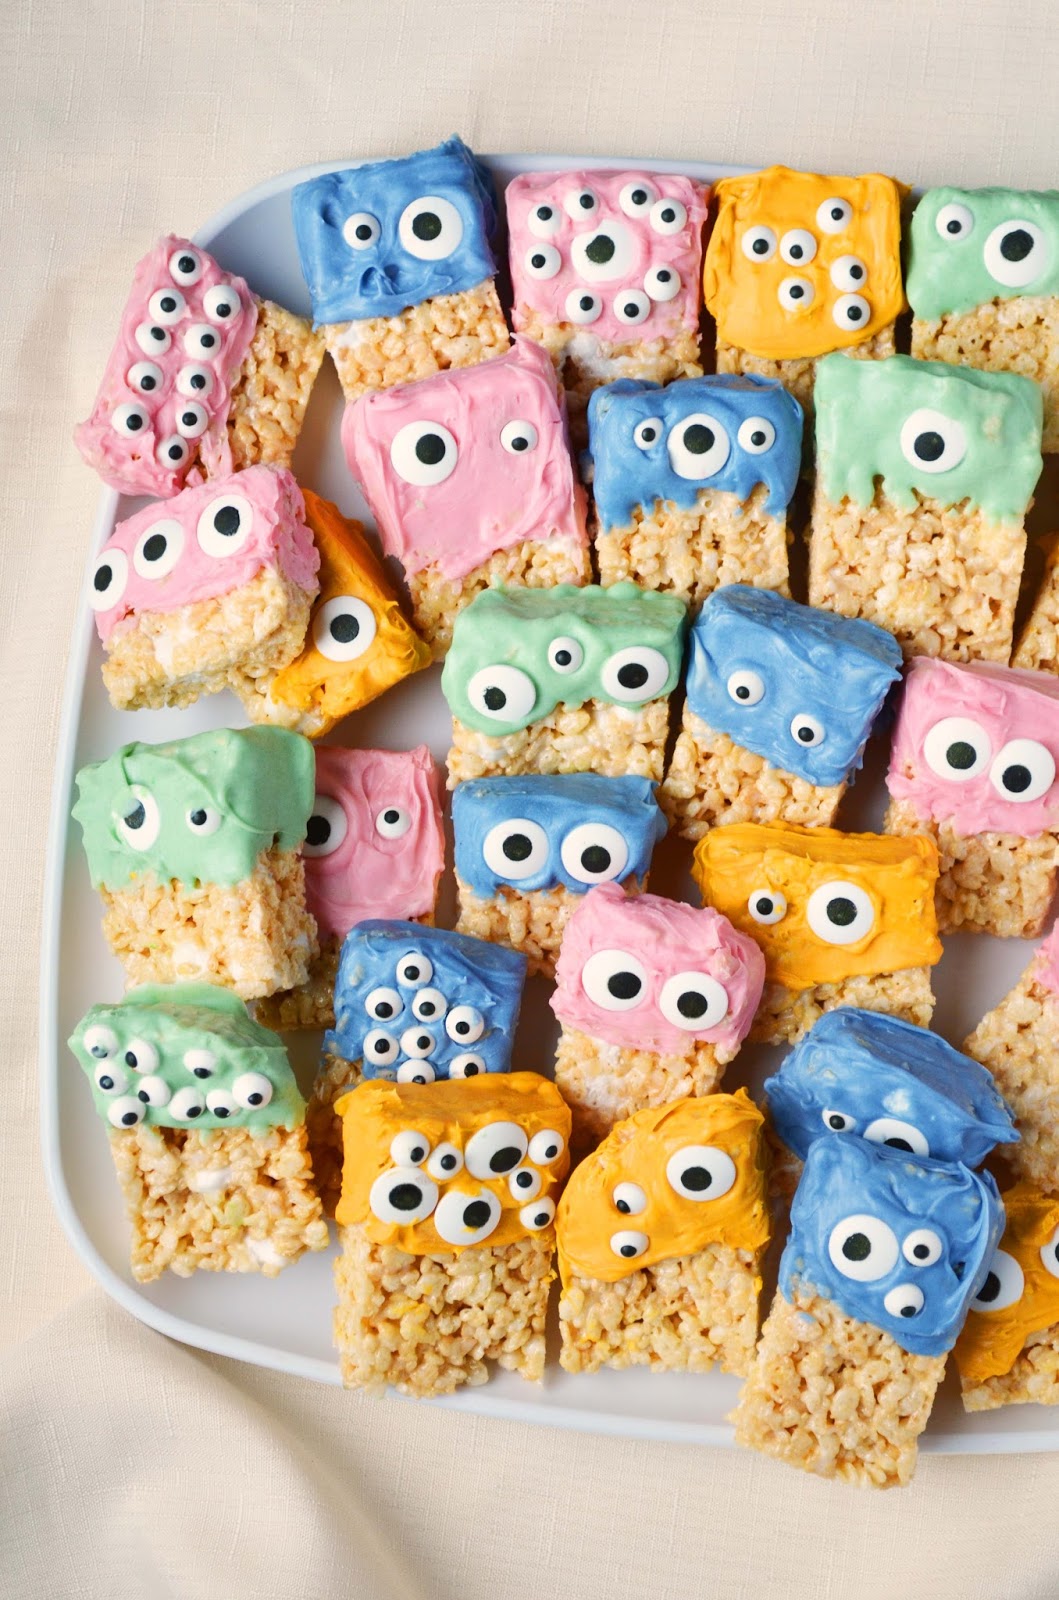 Our Beautiful Mess: Rice Krispie Treat Monsters for Halloween